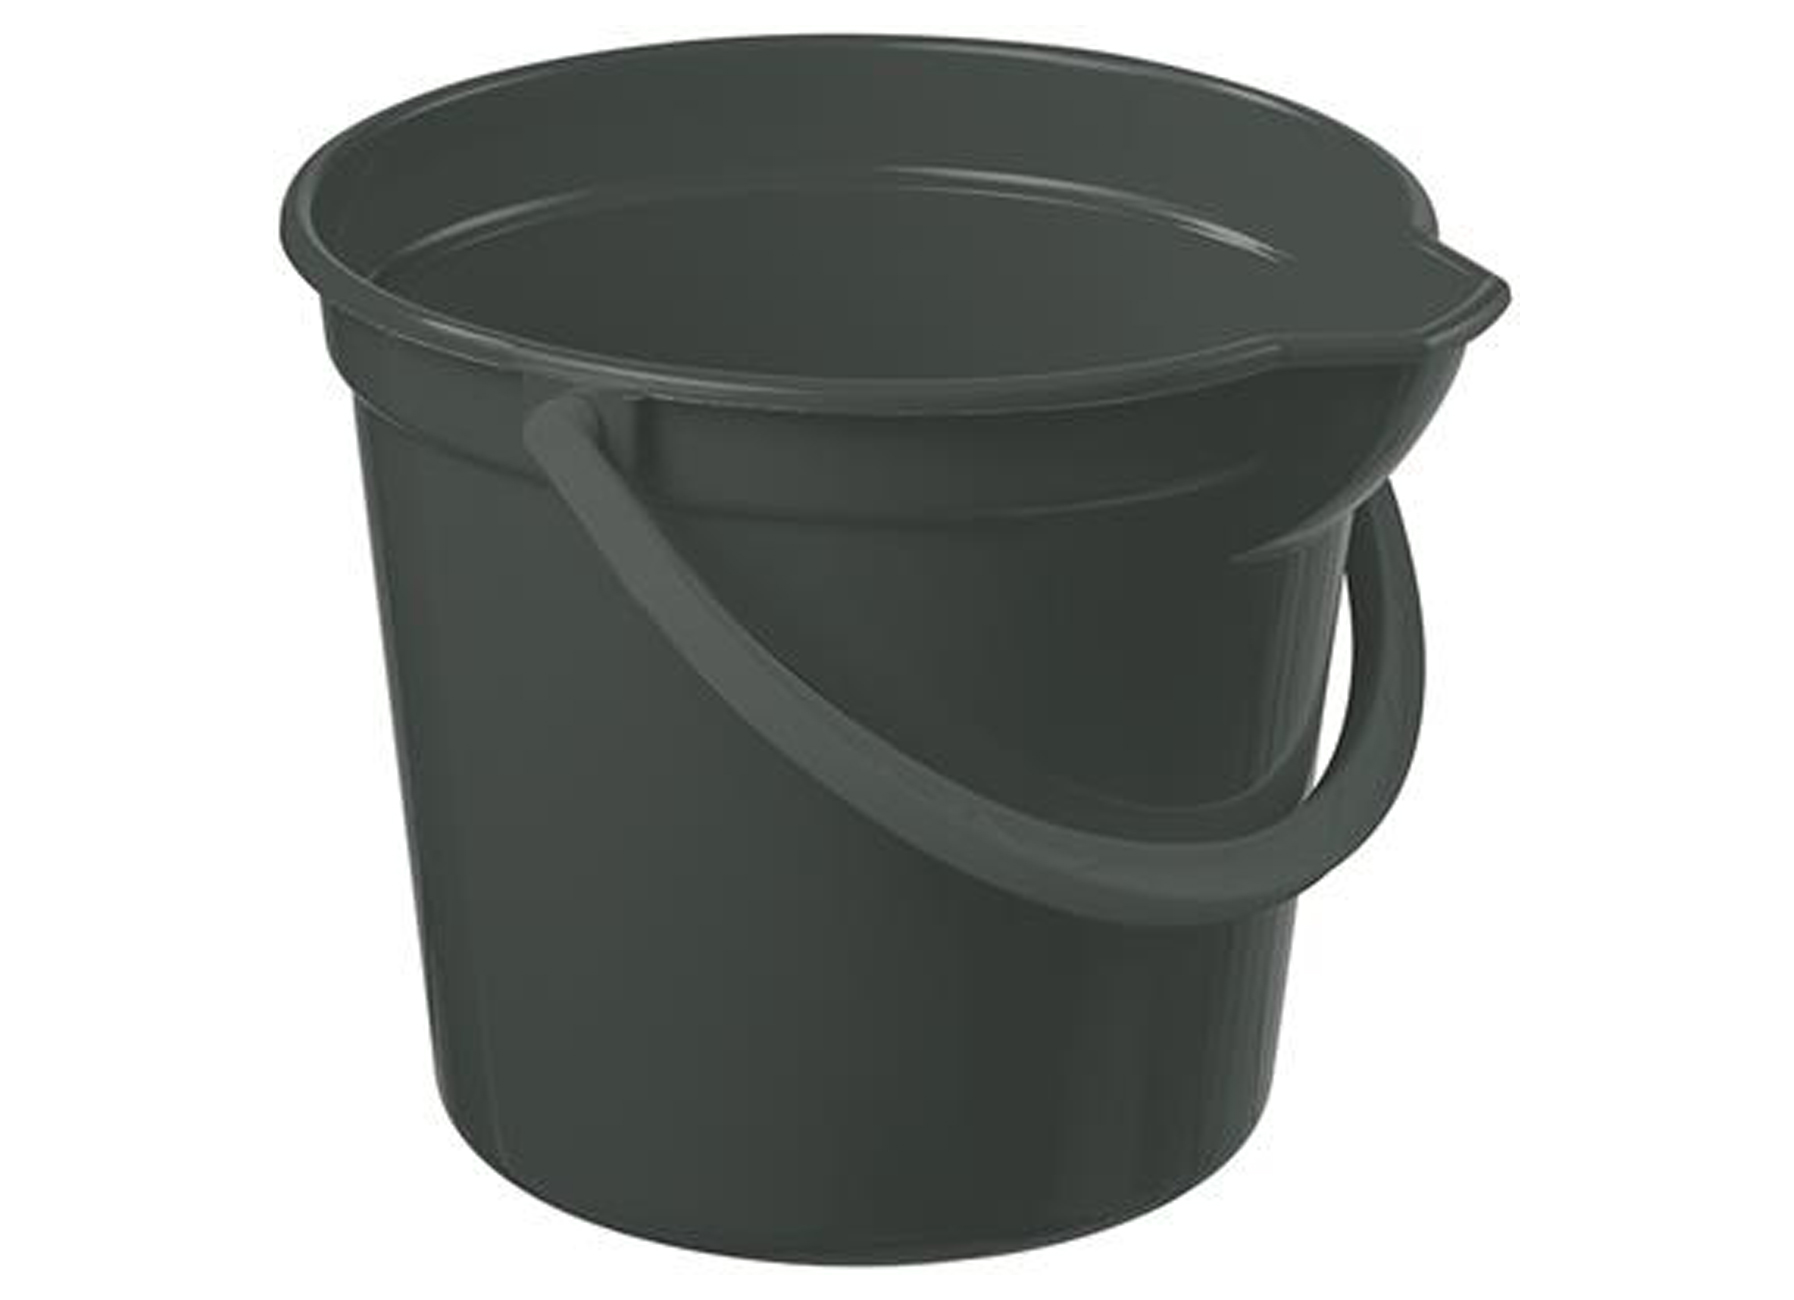 RELIFE BASIC SEAU ANTHRACITE 7,5L